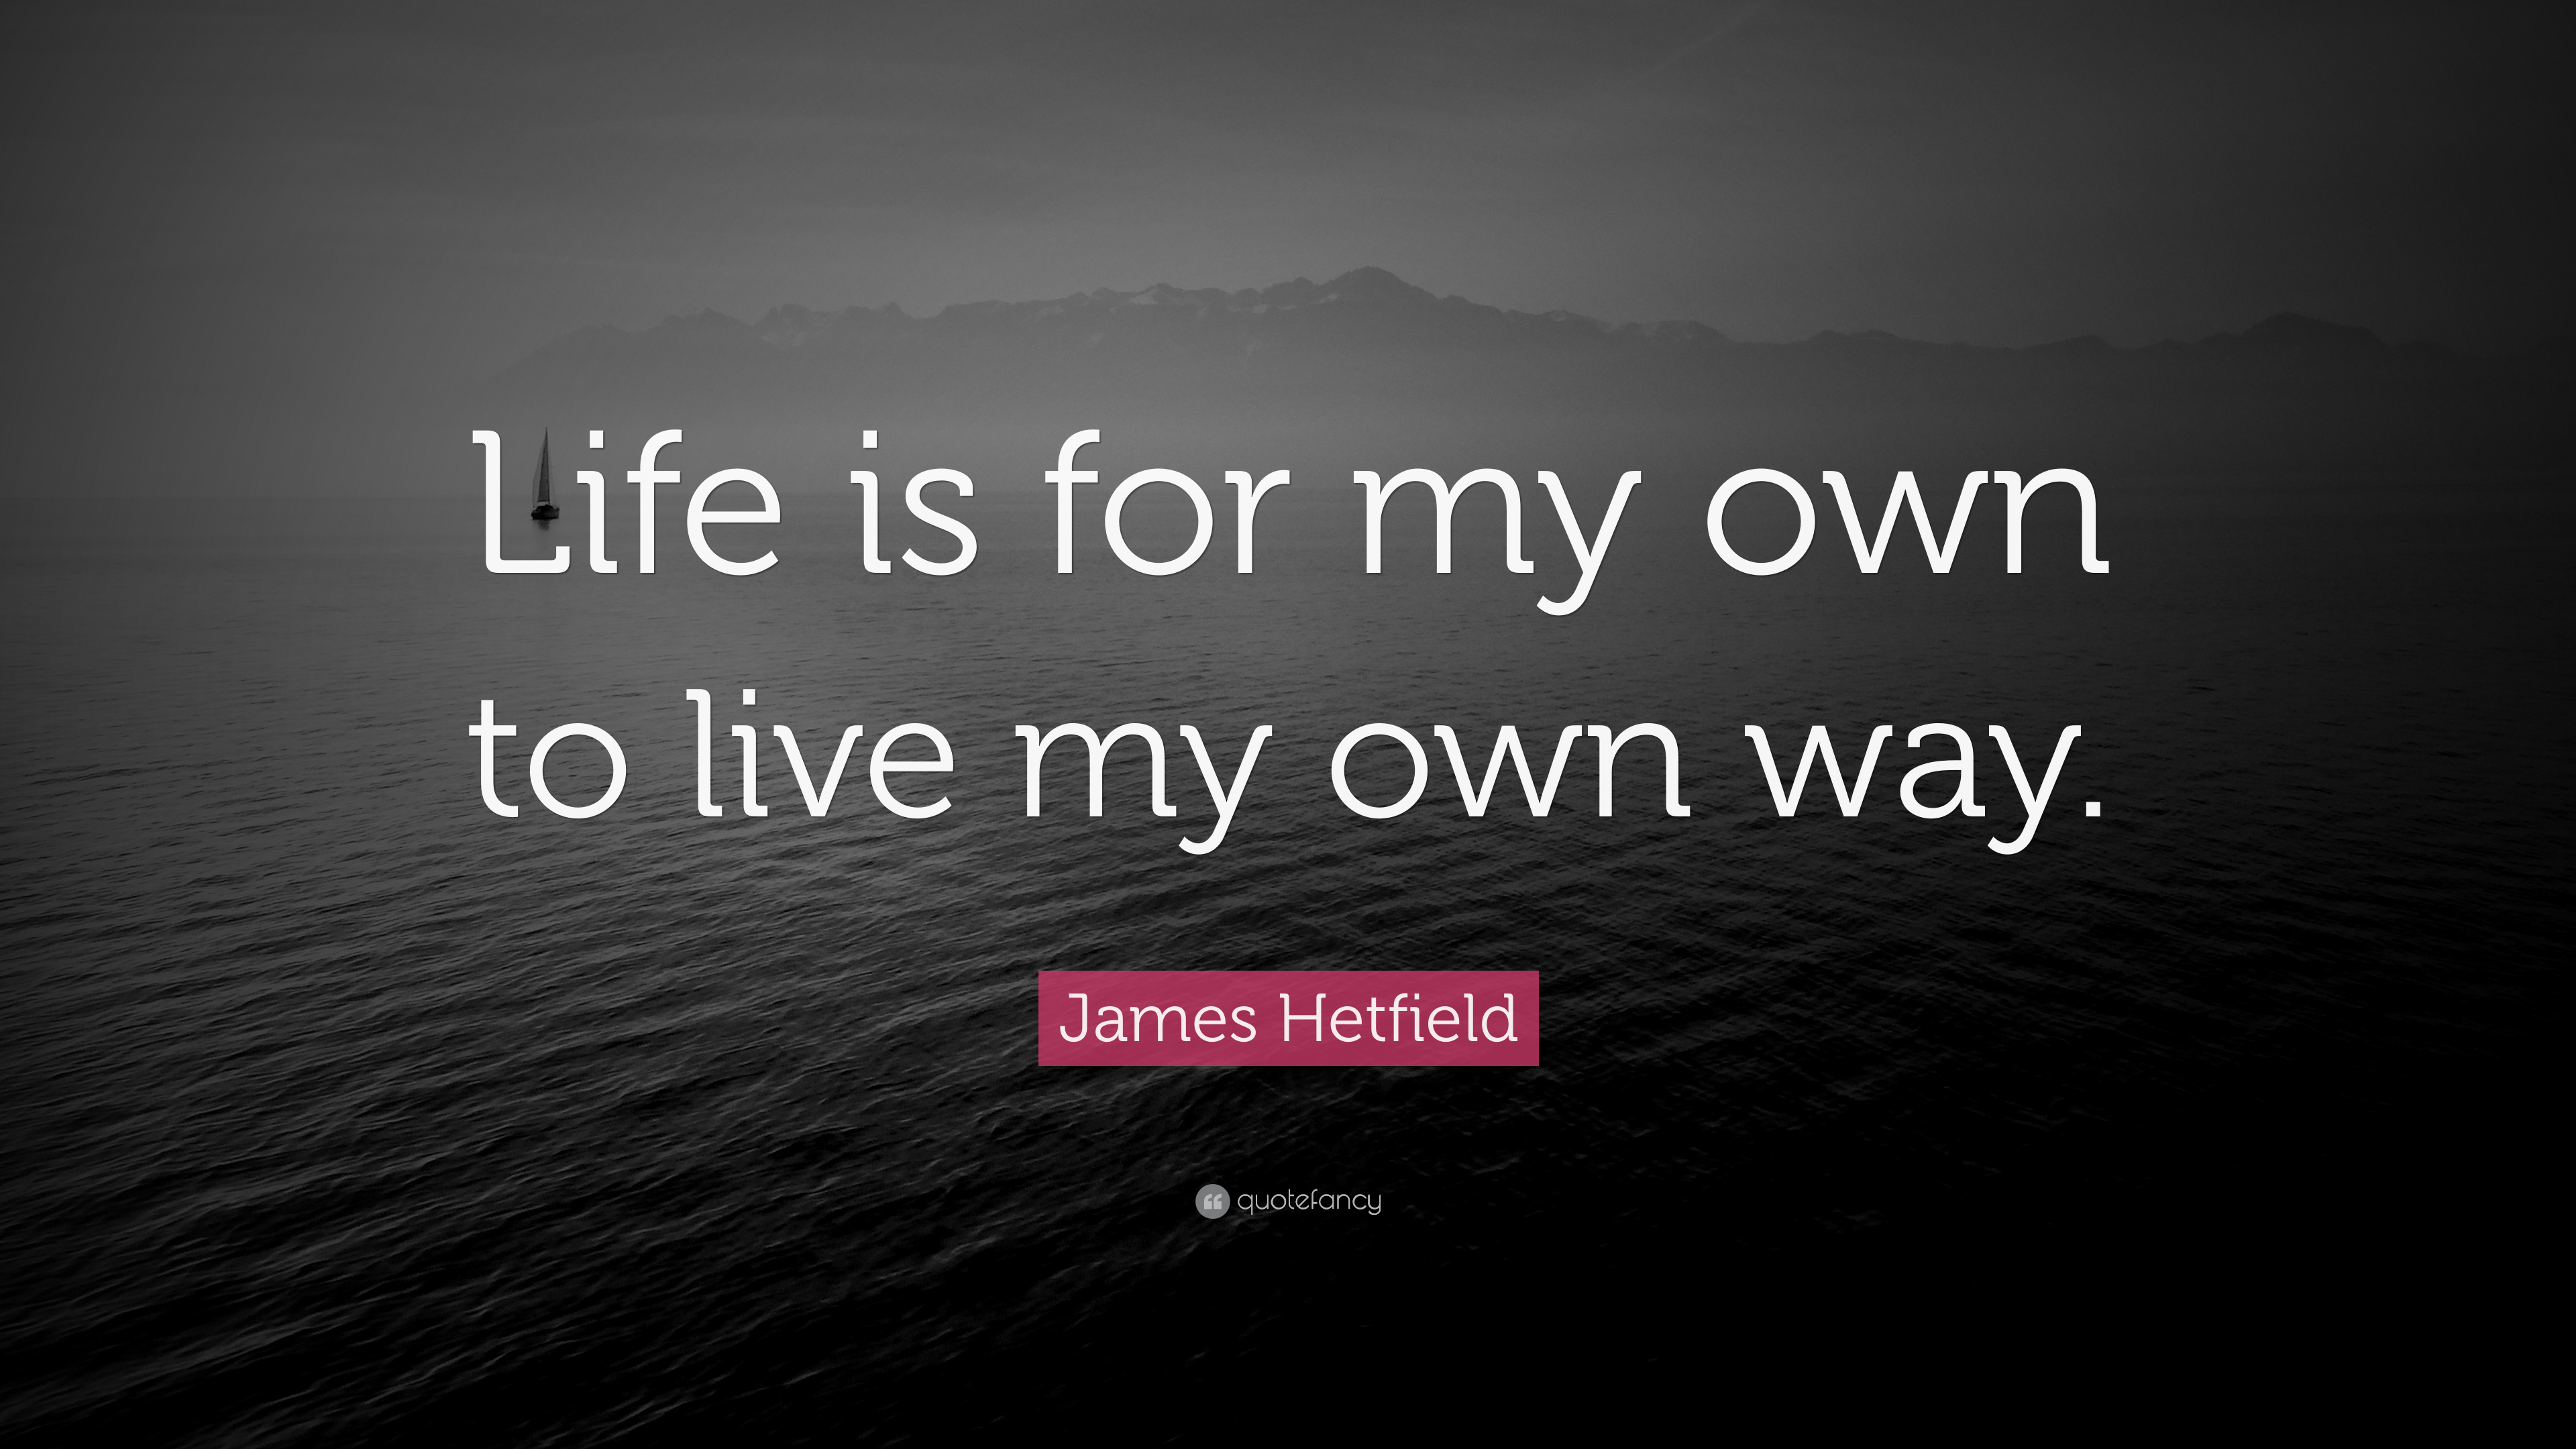 8 James Hetfield Quotes About Life